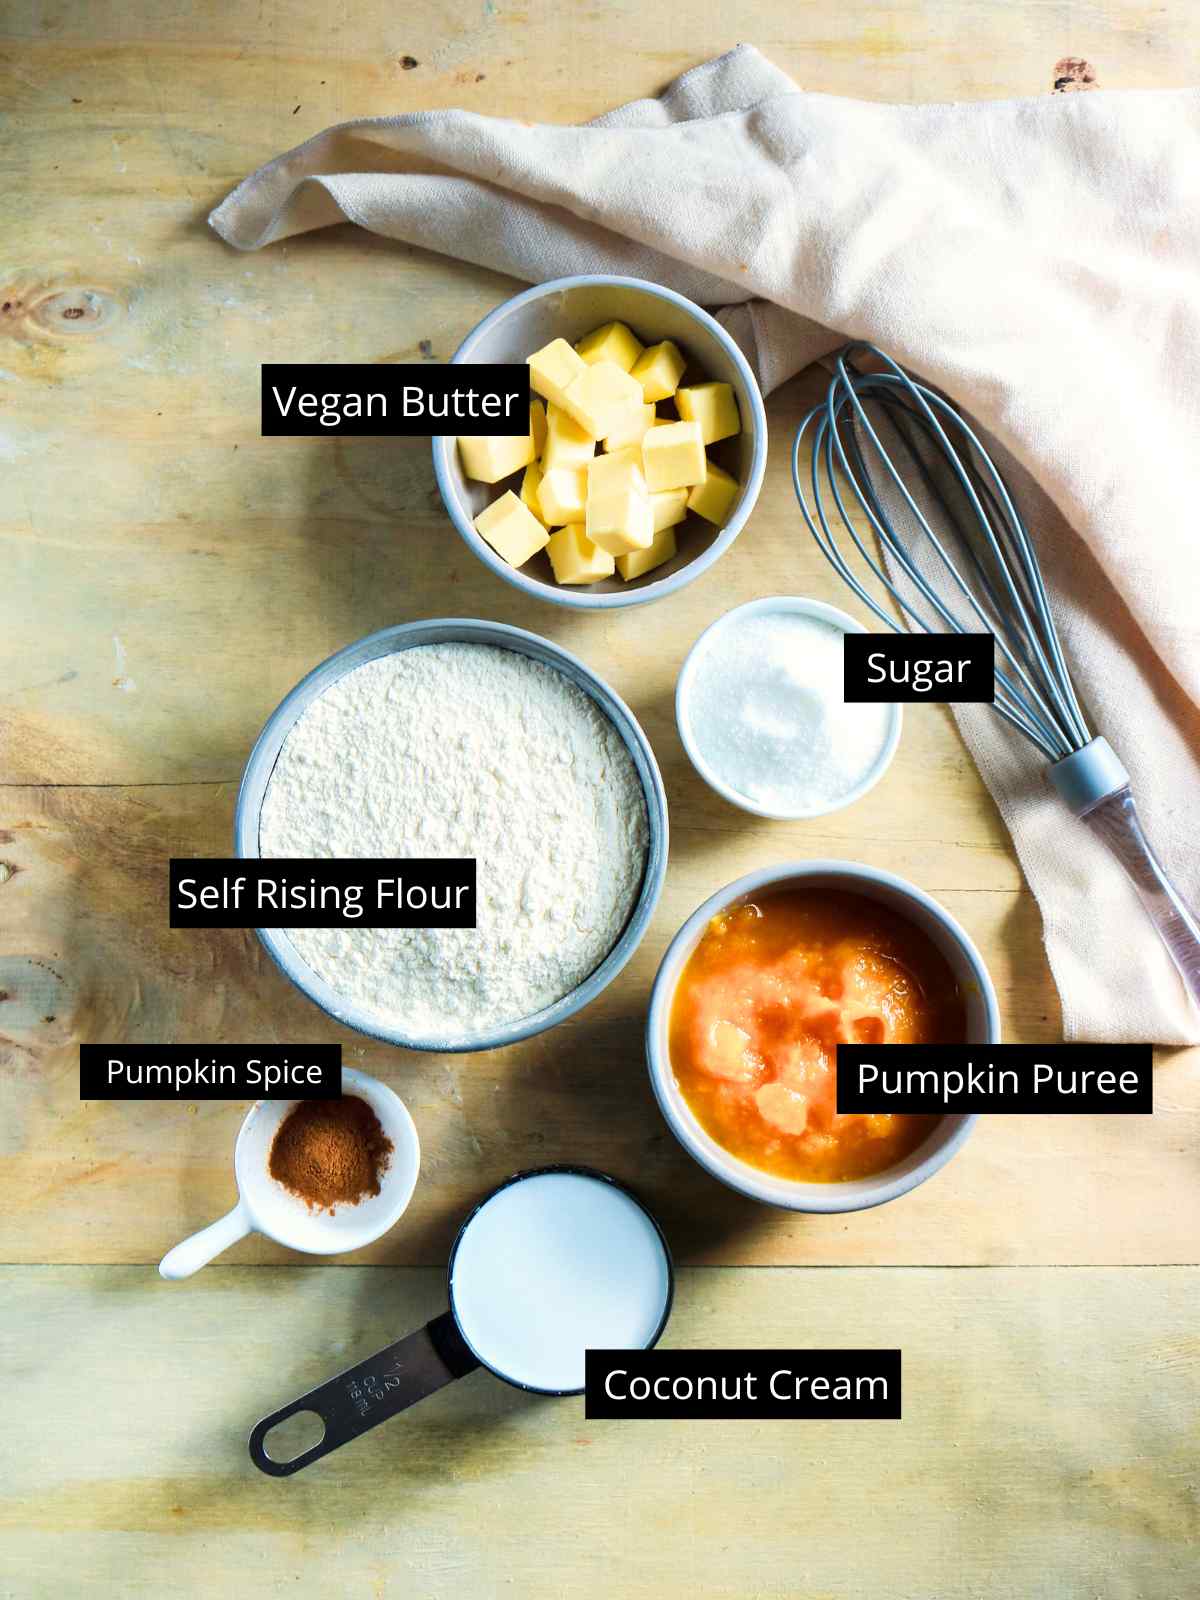 Ingredients to make eggless pumpkin scones placed on a wooden background.